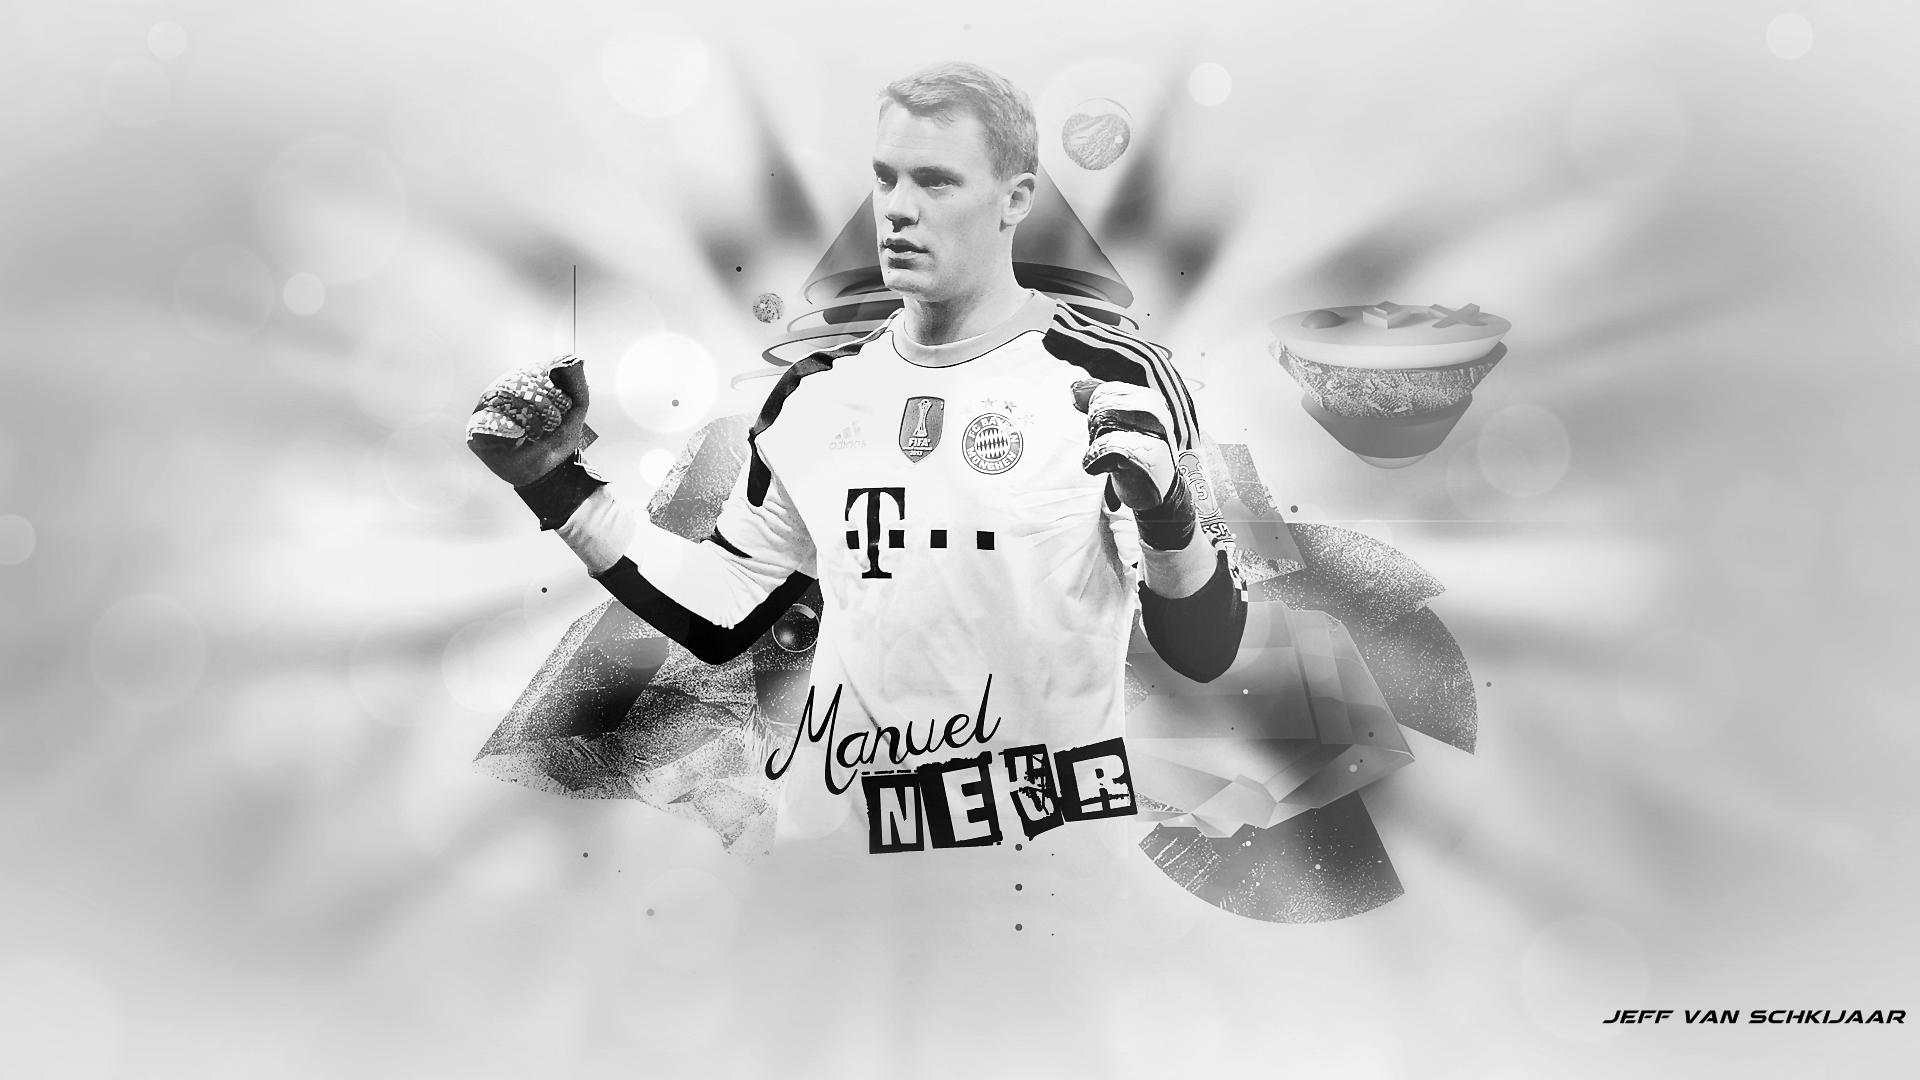 Wallpaper, Manuel neuer and Germany